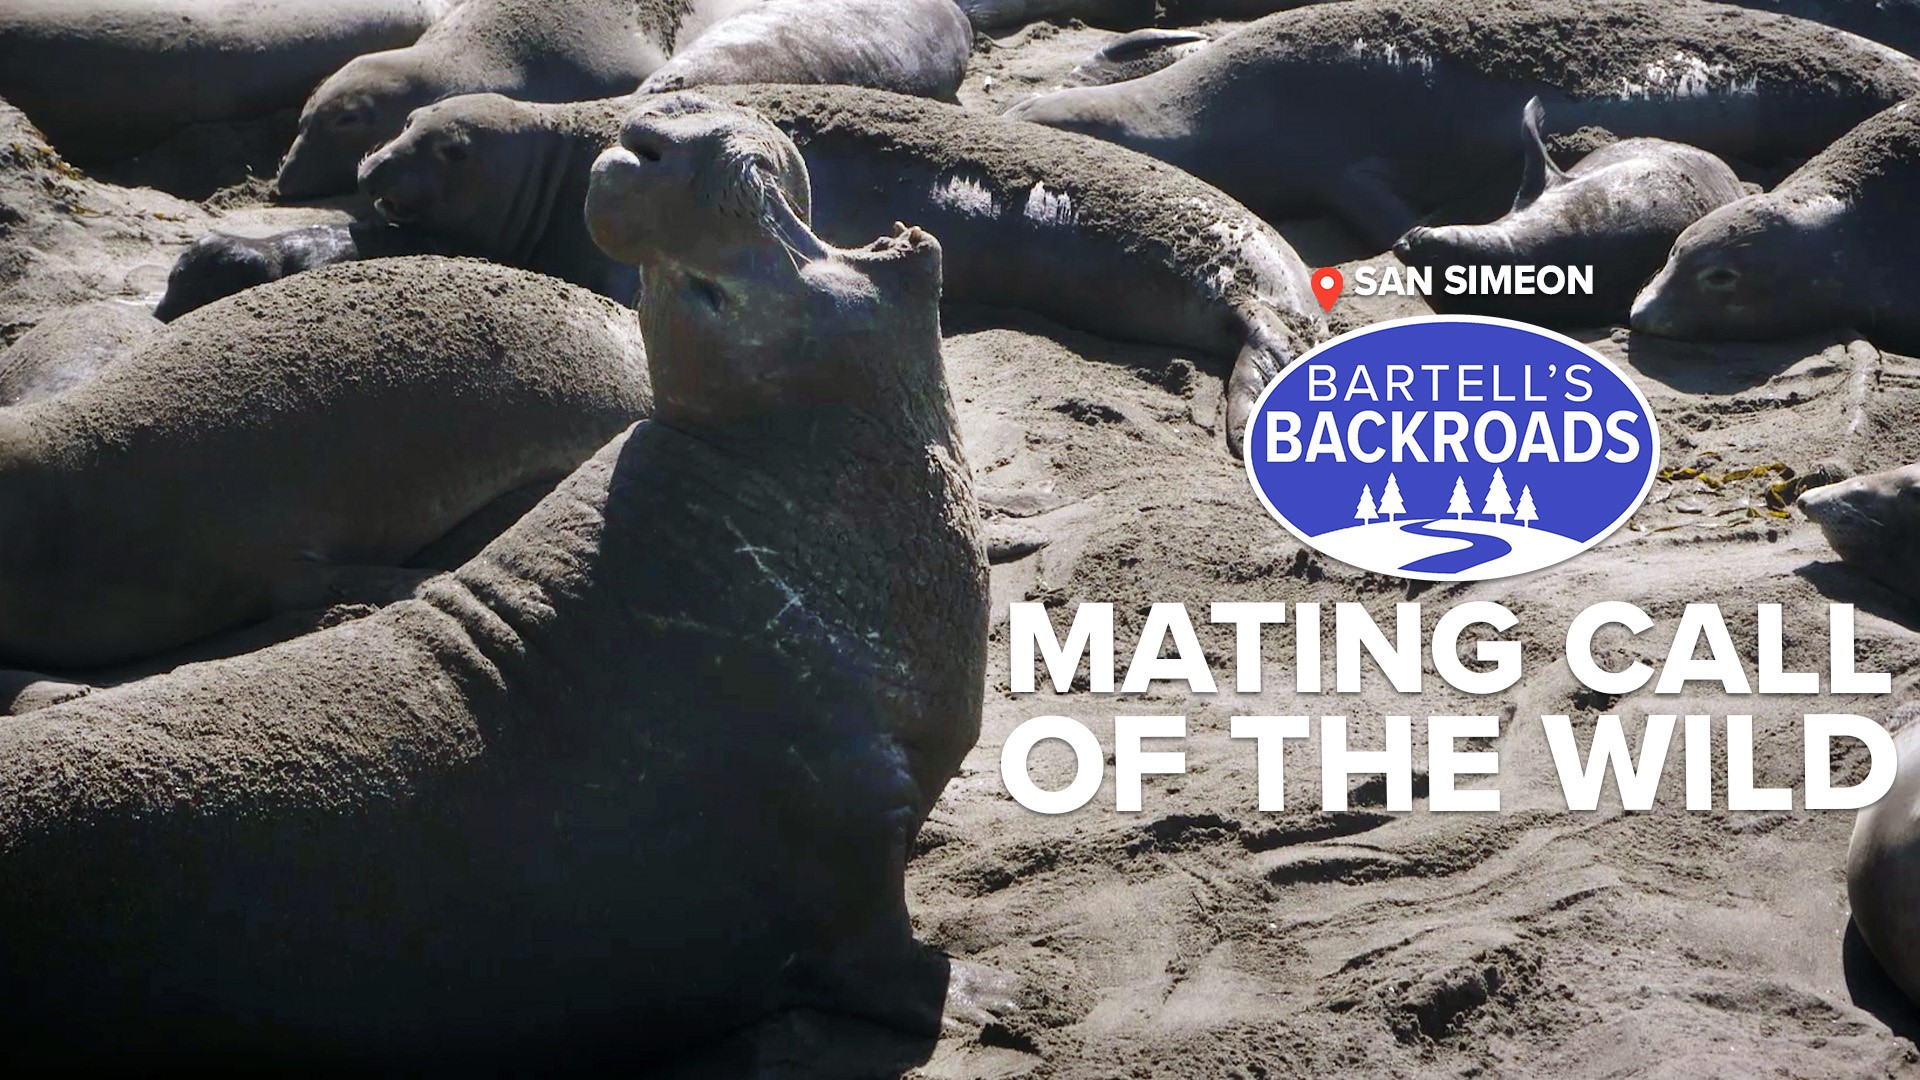 During mating season, a yearly elephant seal gathering takes over the beach of one coastal California town.